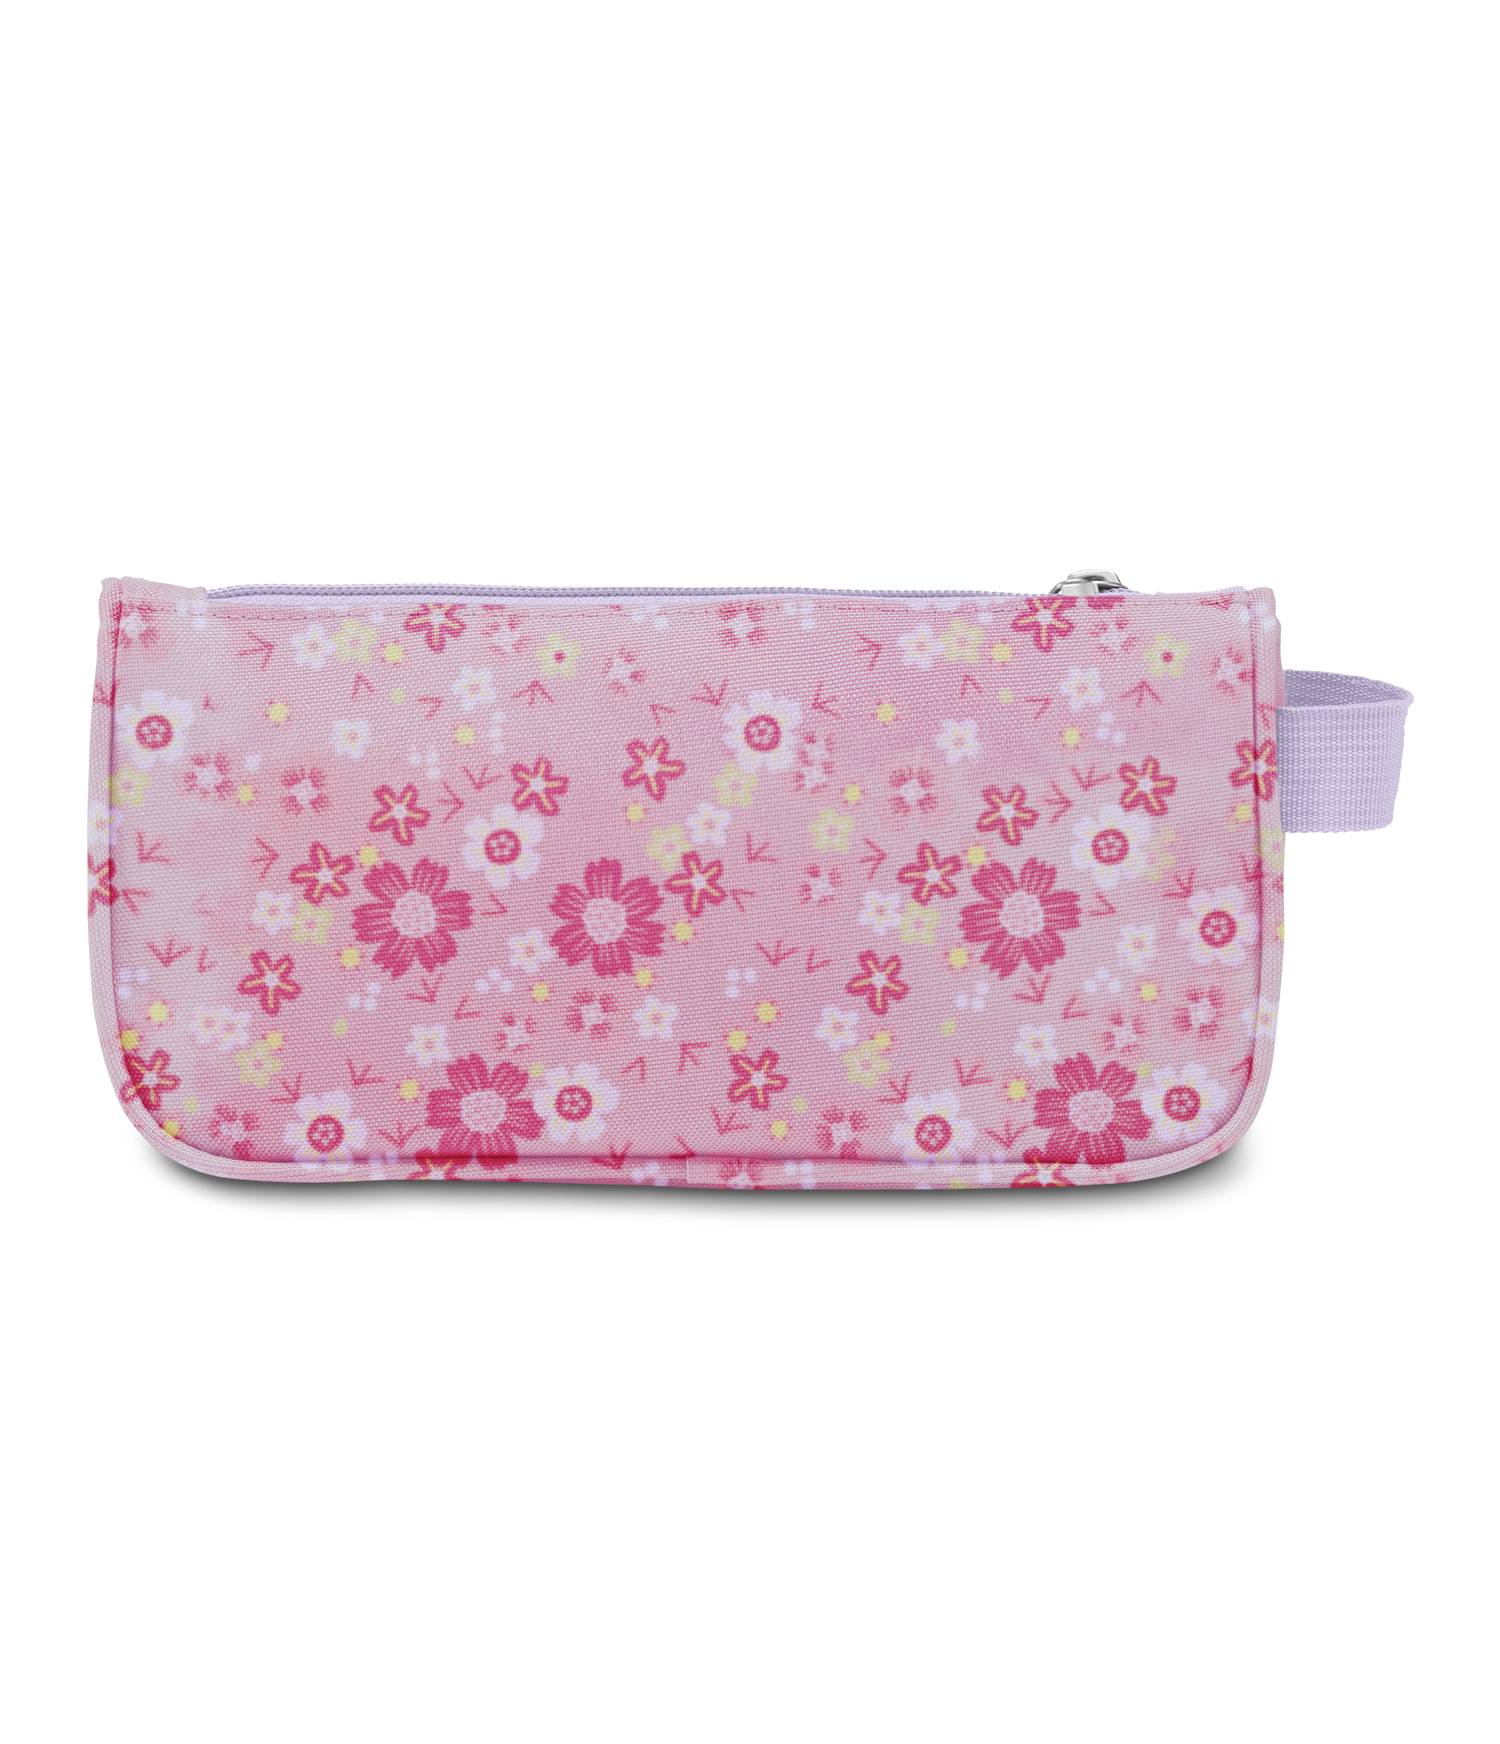 JANSPORT MEDIUM ACCESSORY POUCH BABY BLOSSOM